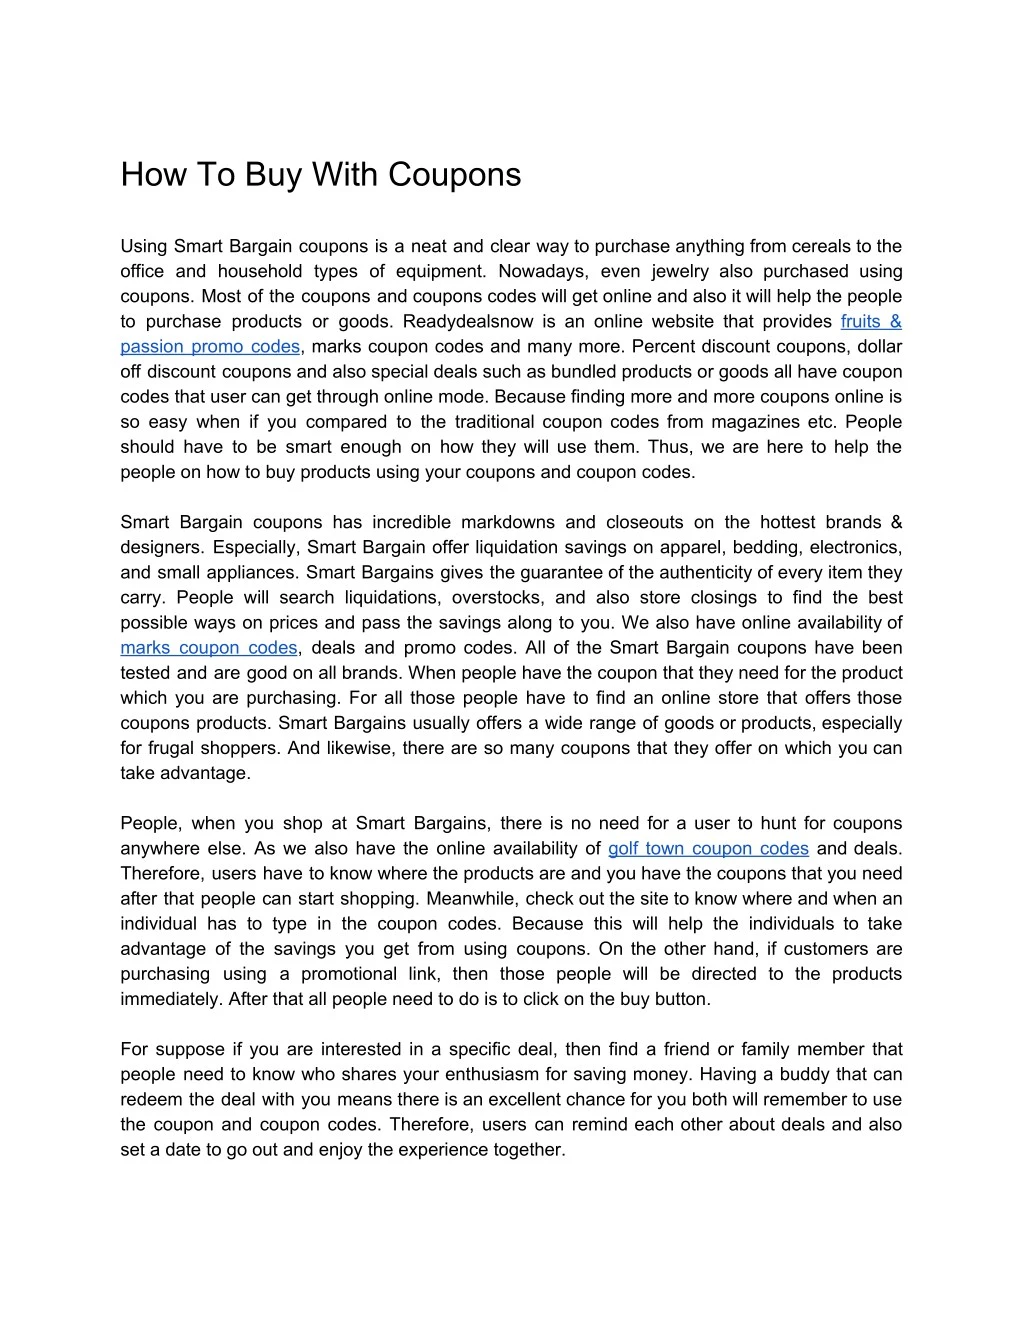 how to buy with coupons